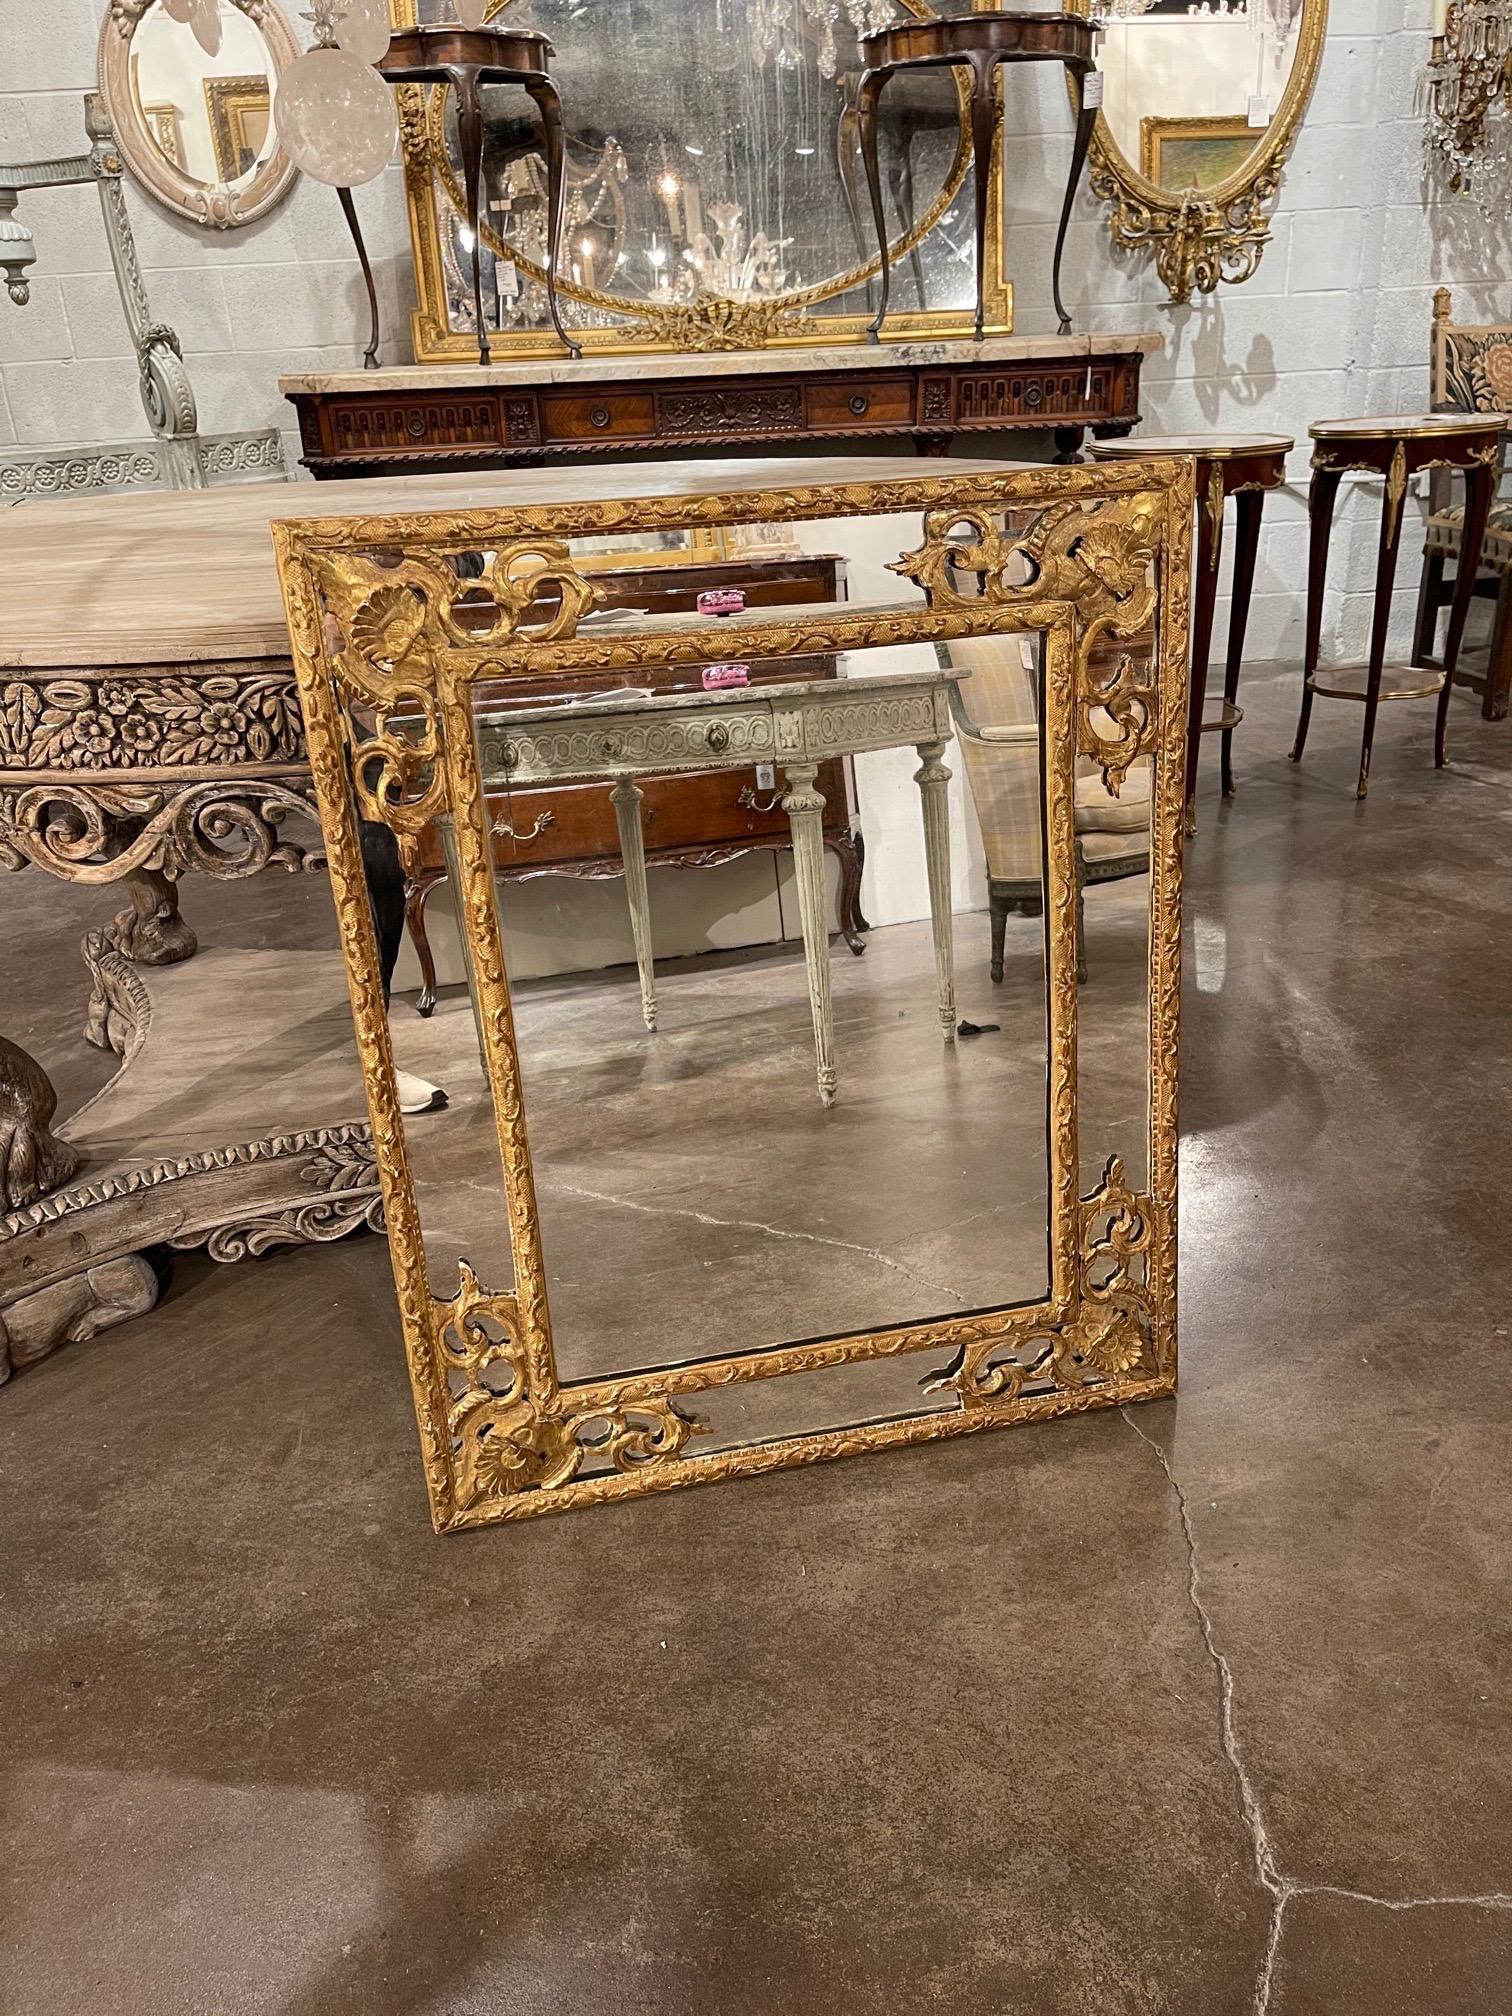 Beautiful 18th century Italian carved and giltwood mirror. Very fine intricate carvings on this piece. Would work well in a variety of settings.